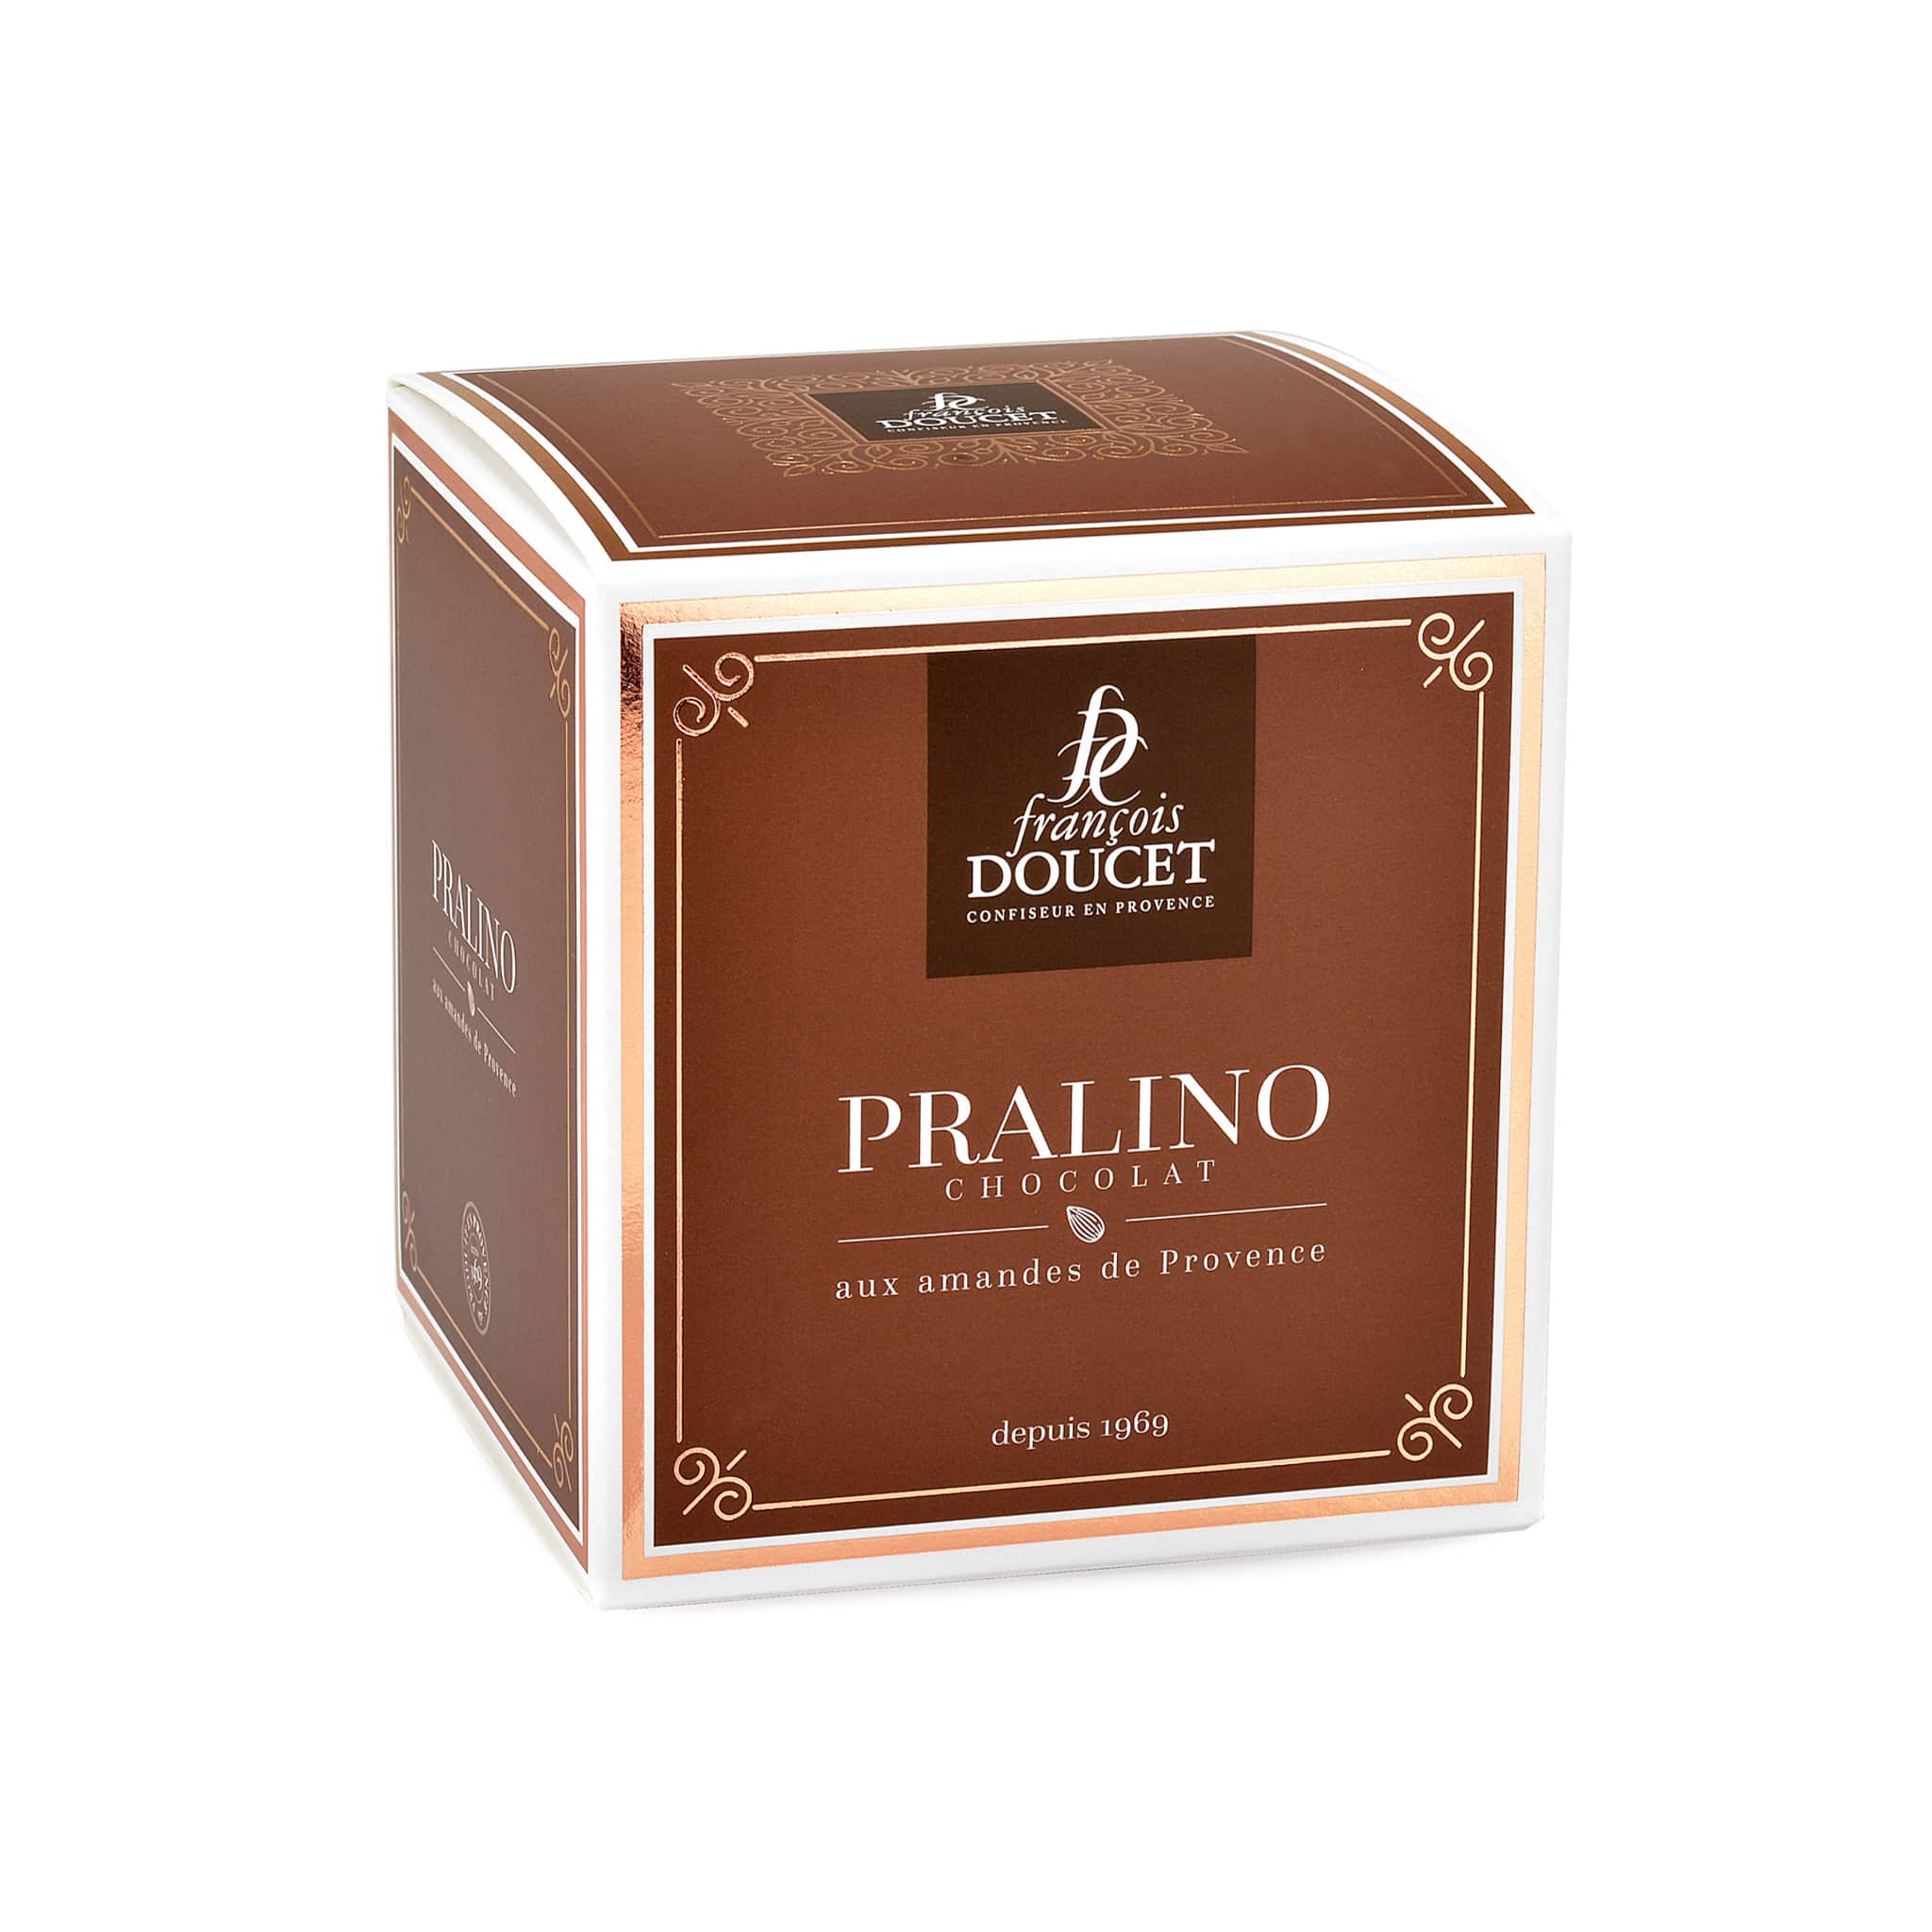 francois doucet chocolate pralines box on white background